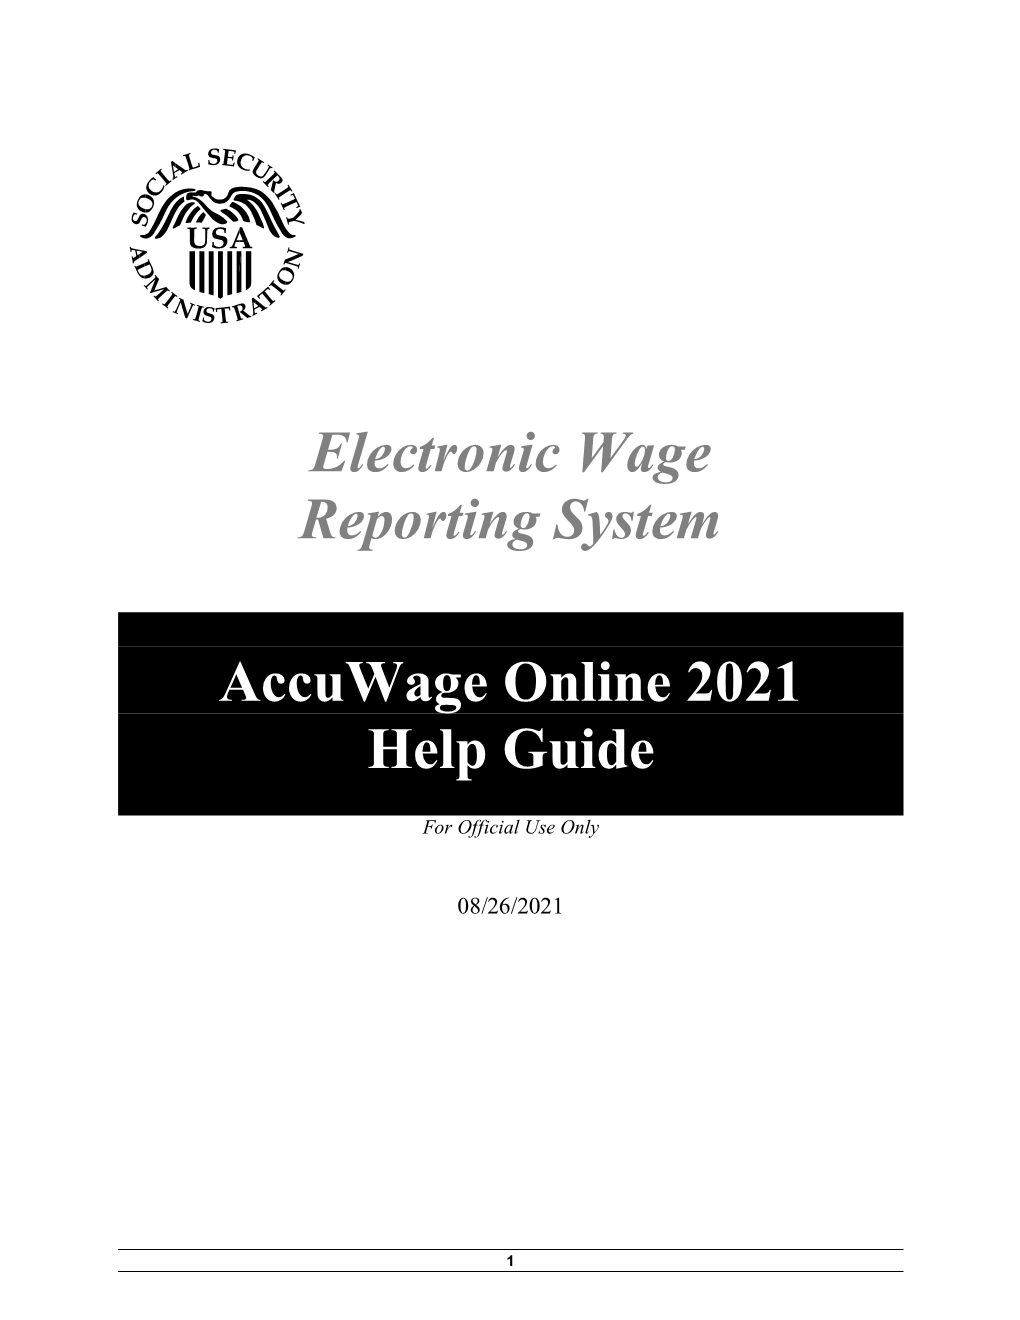 Accuwage Online Help Guide: This Link Will Open the Microsoft Word Version of the Accuwage Online Help Guide